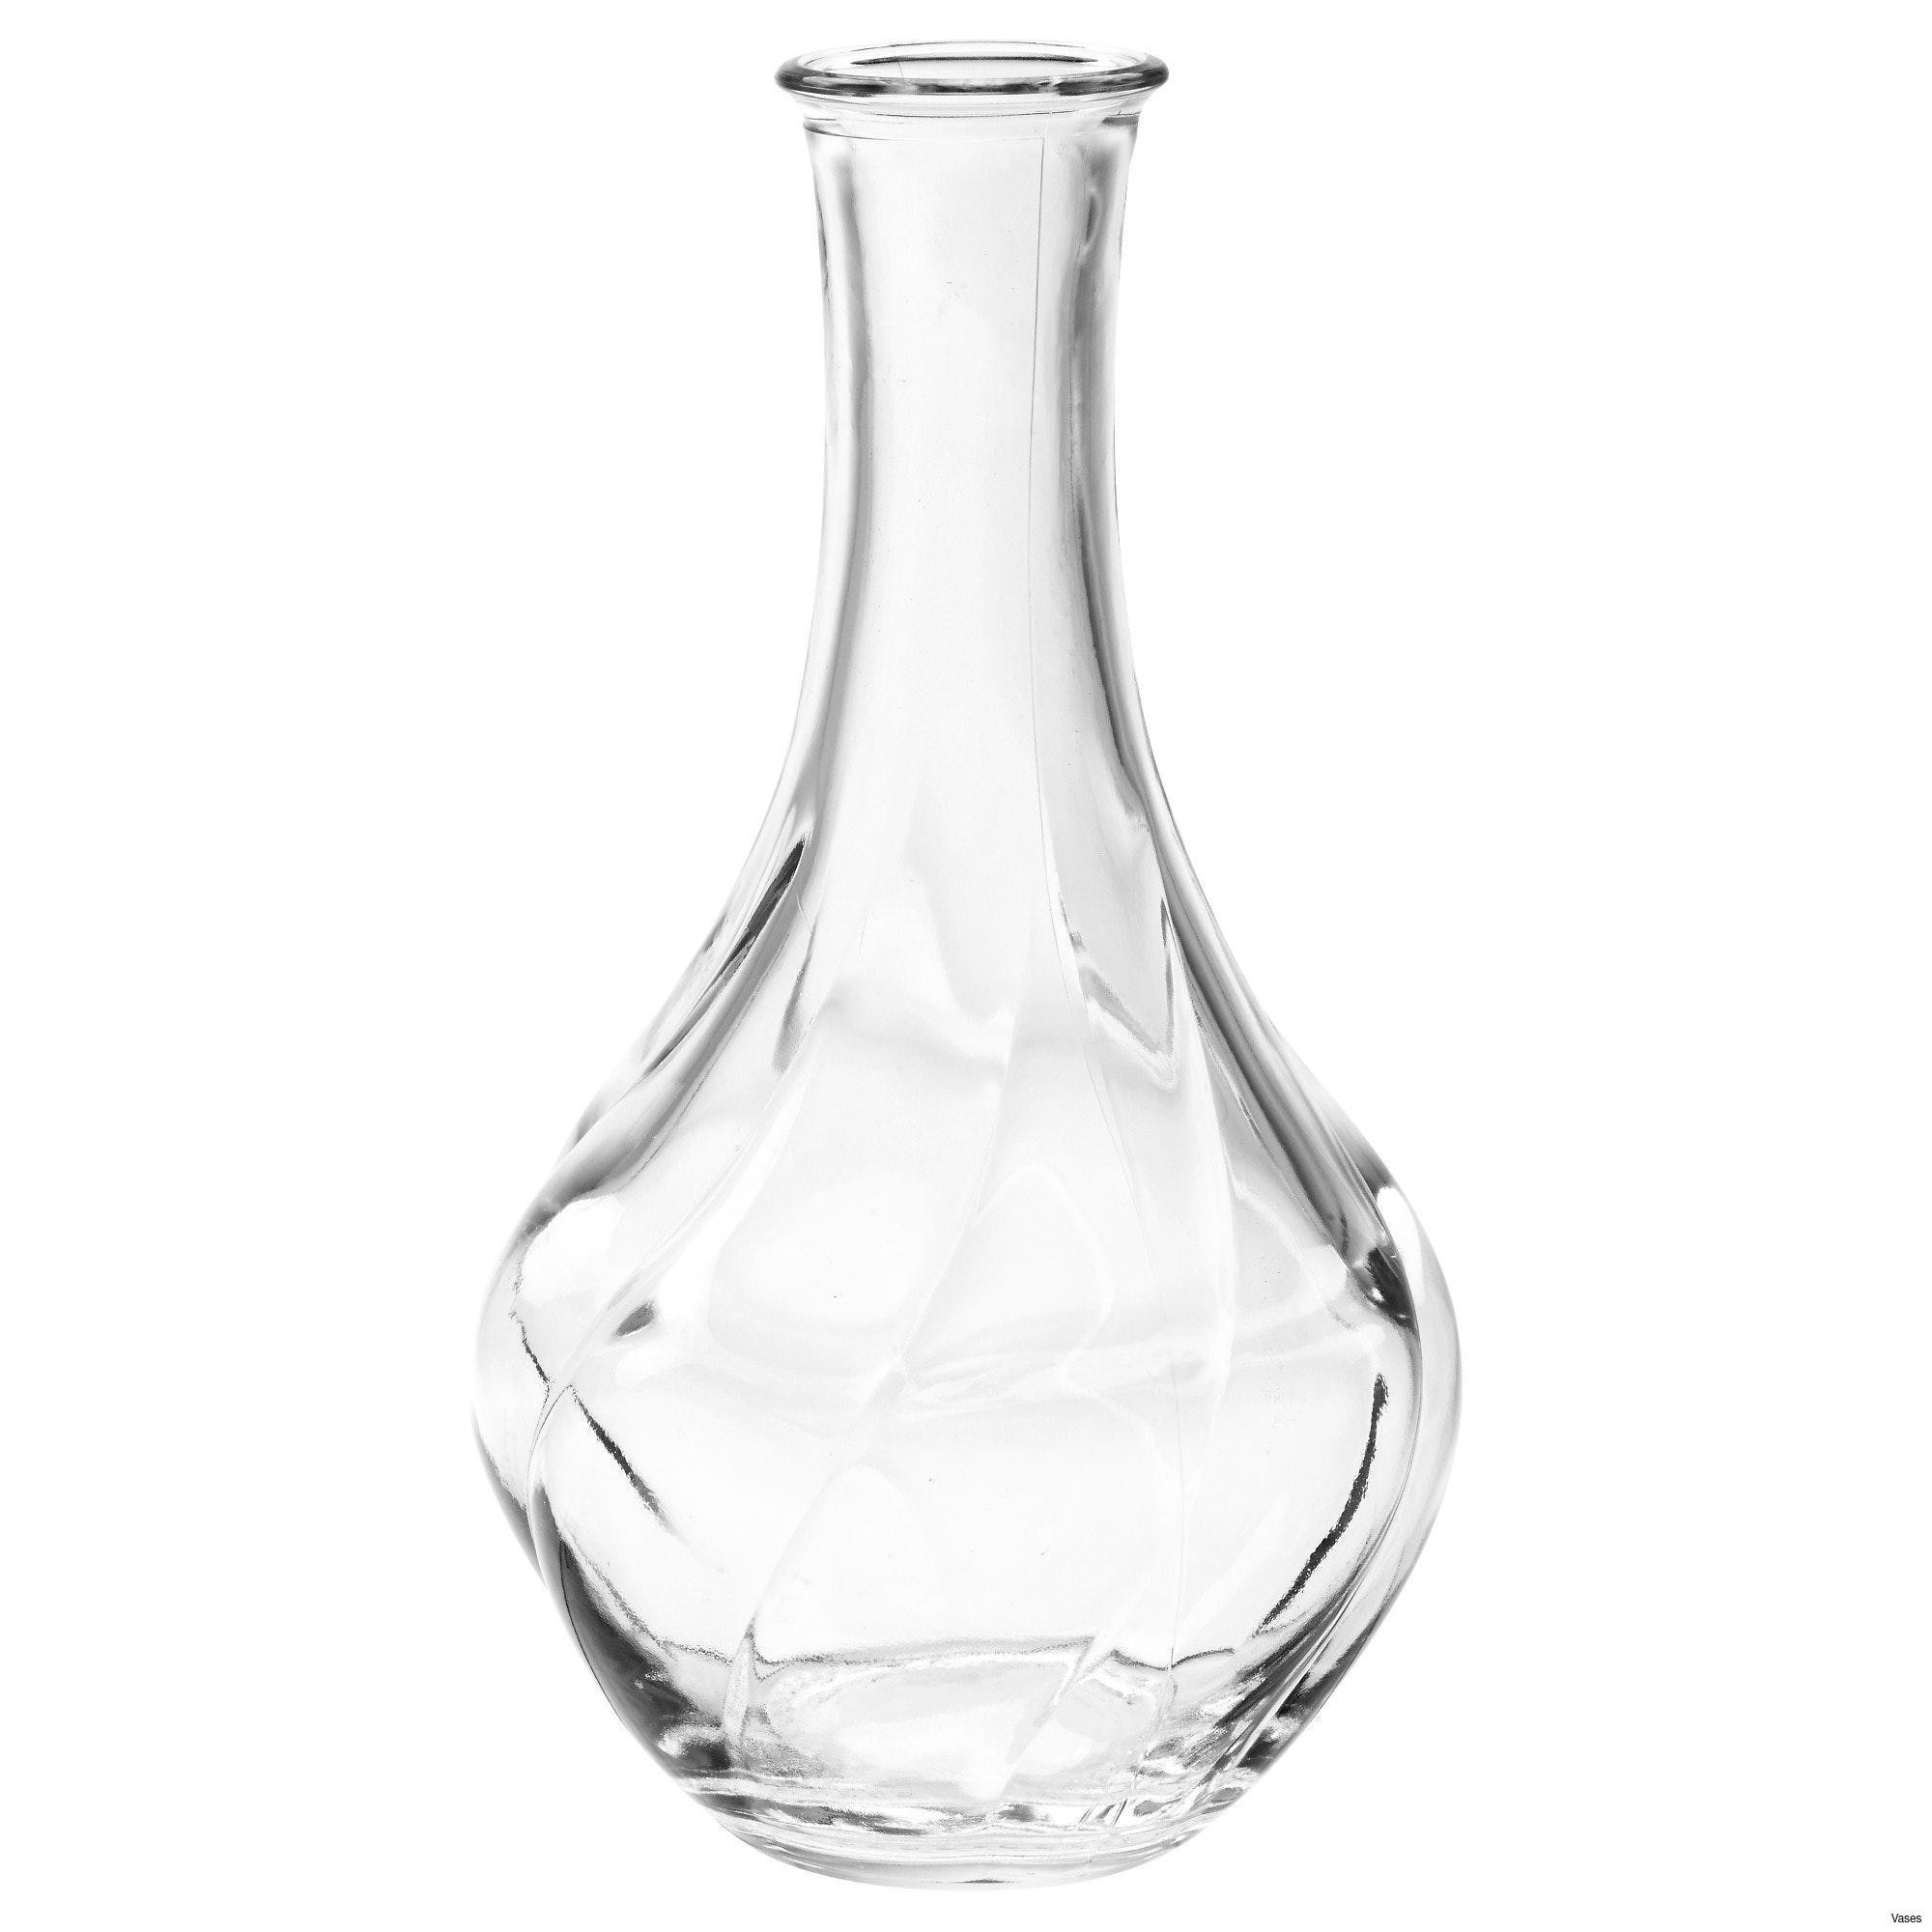 23 Fashionable Black and White Large Vase 2024 free download black and white large vase of large black vase collection living room glass vases fresh clear vase with large black vase collection living room glass vases fresh clear vase 0d tags amazing a